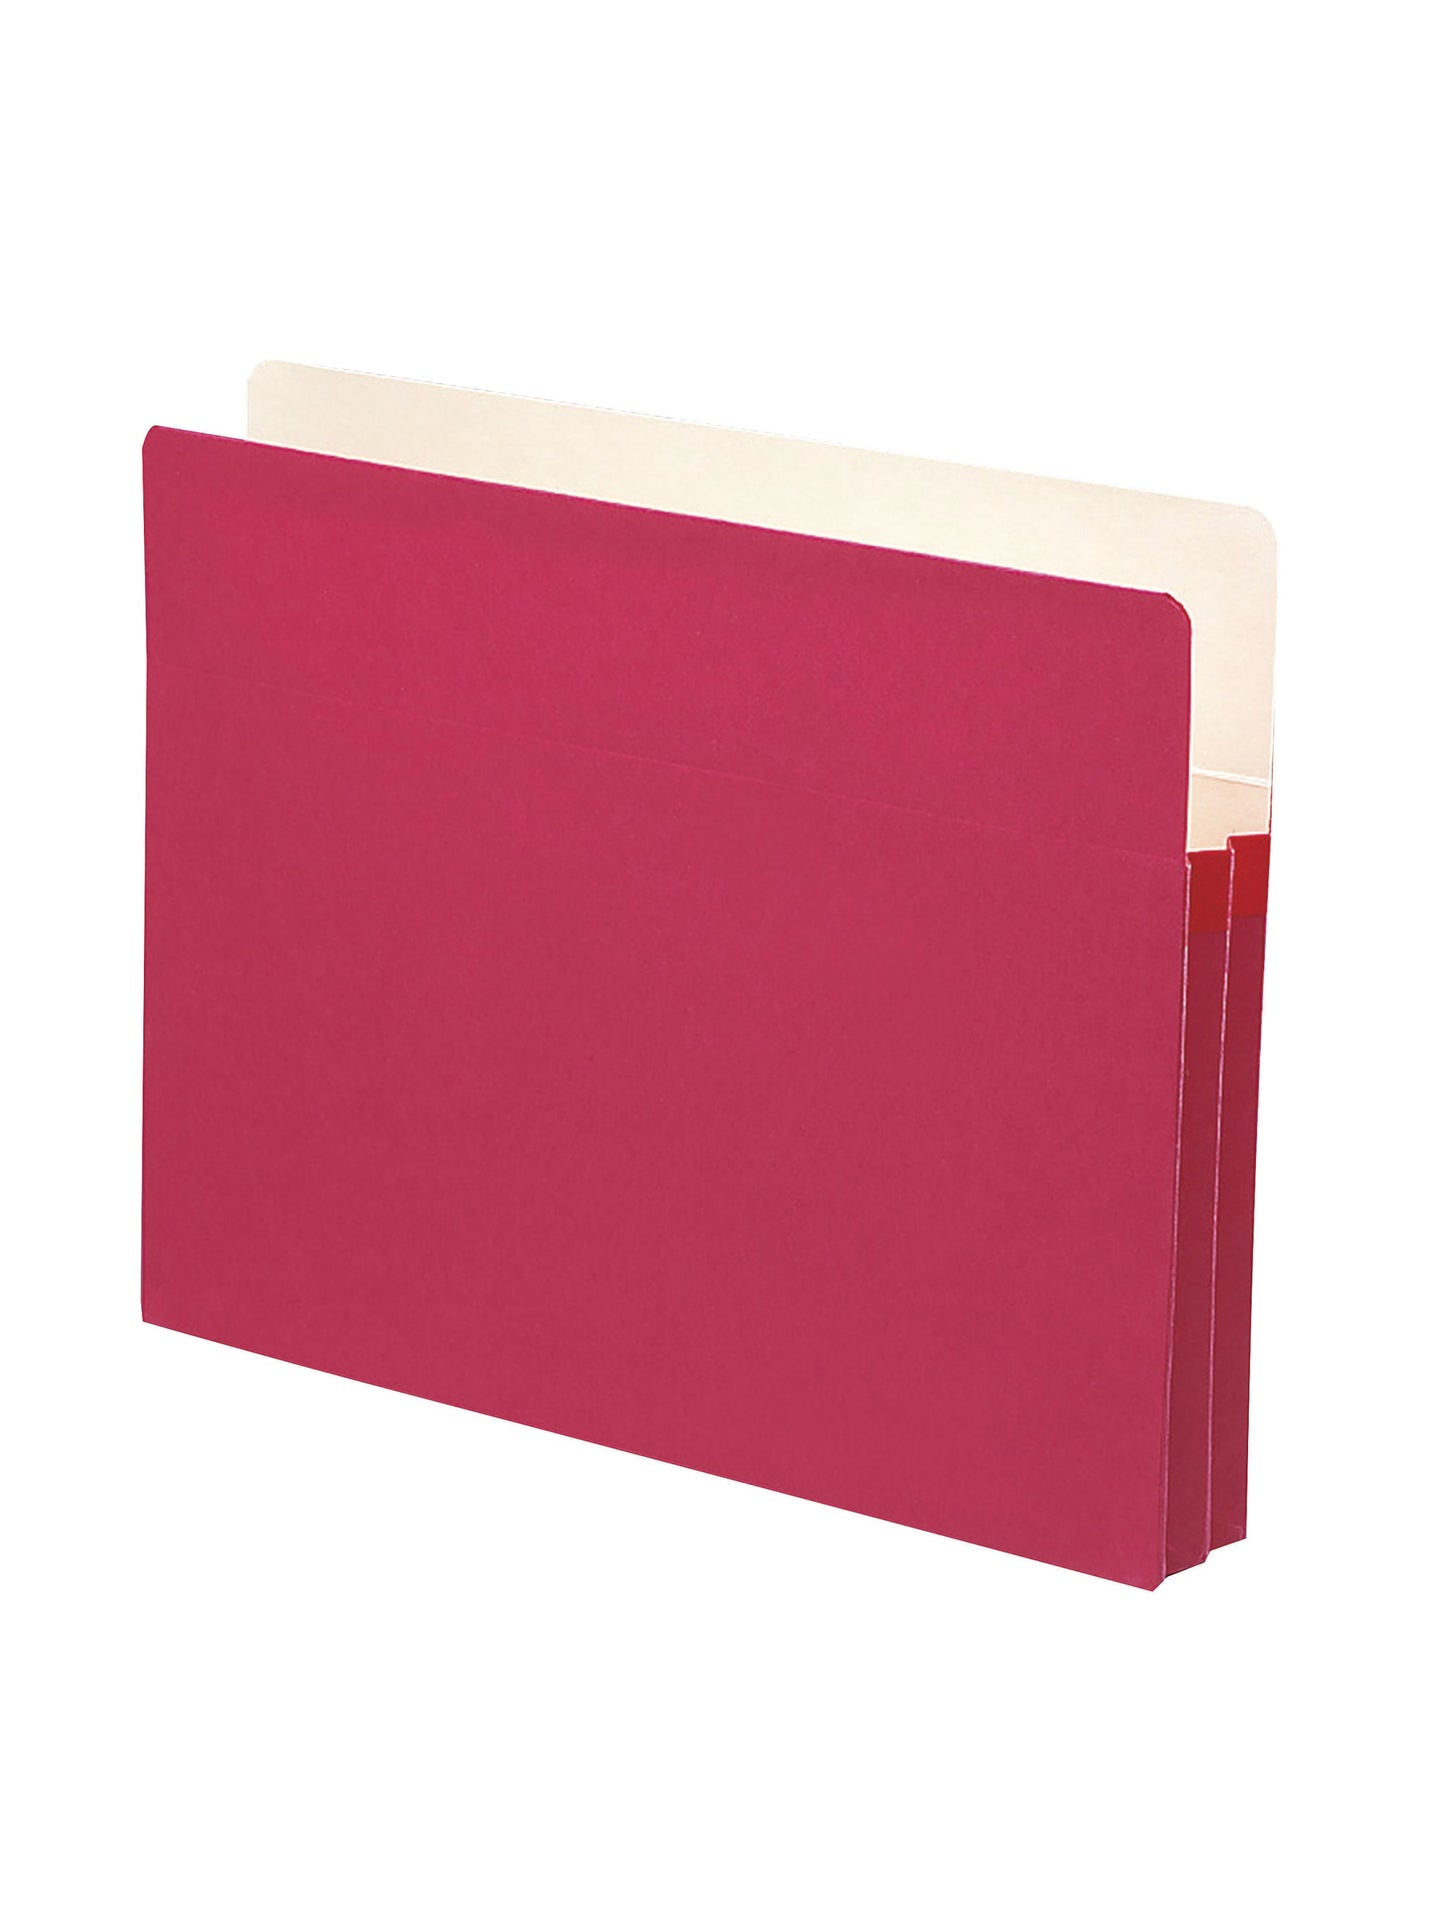 File Pockets, 1-3/4 inch Expansion, Straight-Cut Tab, Red Color, Letter Size, Set of 0, 30086486732216